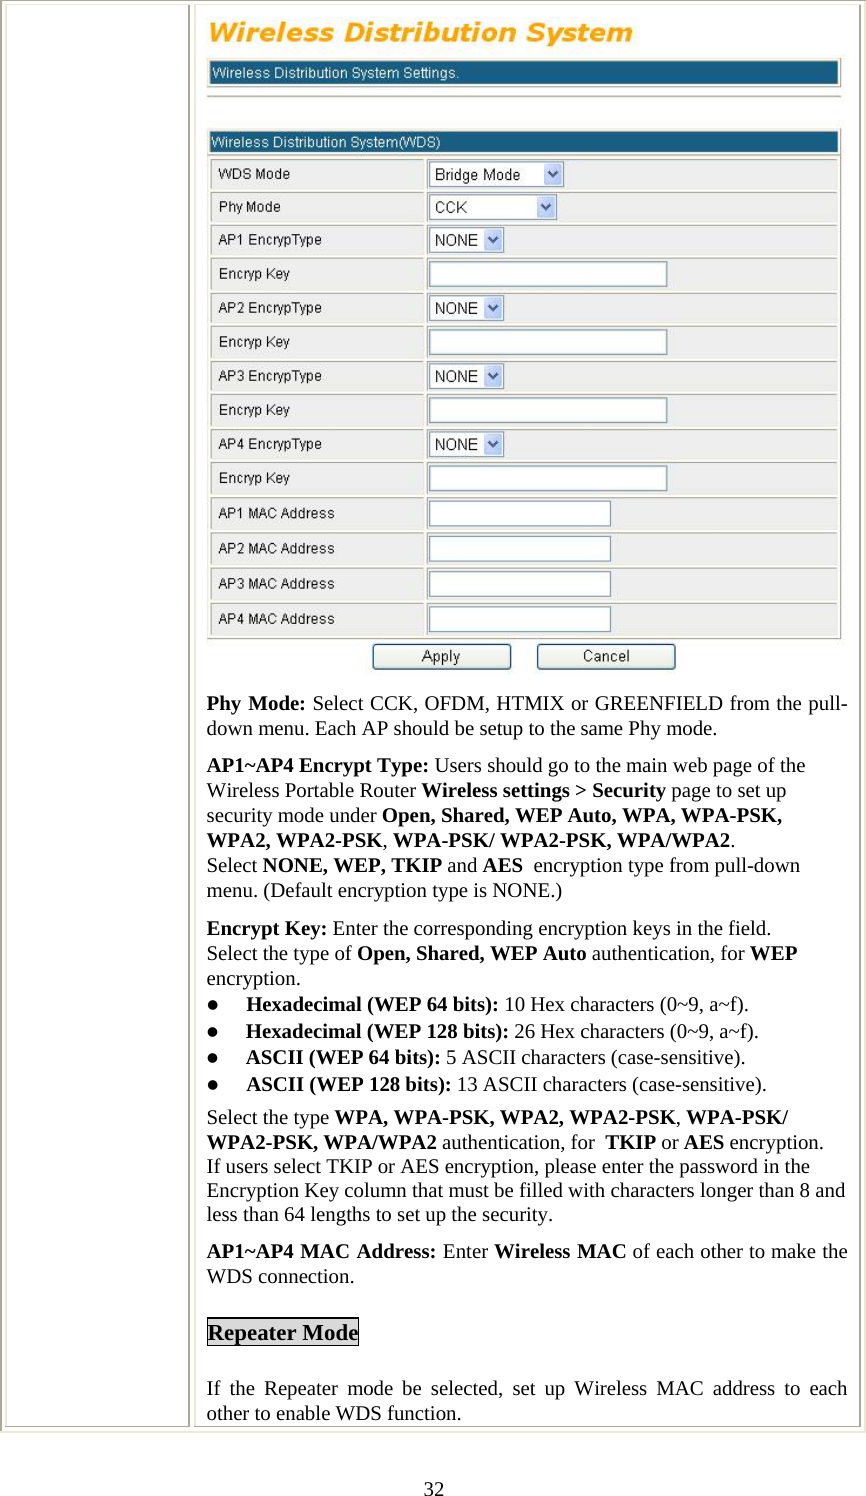   32Phy Mode: Select CCK, OFDM, HTMIX or GREENFIELD from the pull-down menu. Each AP should be setup to the same Phy mode. AP1~AP4 Encrypt Type: Users should go to the main web page of the Wireless Portable Router Wireless settings &gt; Security page to set up security mode under Open, Shared, WEP Auto, WPA, WPA-PSK, WPA2, WPA2-PSK, WPA-PSK/ WPA2-PSK, WPA/WPA2. Select NONE, WEP, TKIP and AES  encryption type from pull-down menu. (Default encryption type is NONE.)  Encrypt Key: Enter the corresponding encryption keys in the field.  Select the type of Open, Shared, WEP Auto authentication, for WEP encryption.  z Hexadecimal (WEP 64 bits): 10 Hex characters (0~9, a~f).  z Hexadecimal (WEP 128 bits): 26 Hex characters (0~9, a~f). z ASCII (WEP 64 bits): 5 ASCII characters (case-sensitive). z ASCII (WEP 128 bits): 13 ASCII characters (case-sensitive). Select the type WPA, WPA-PSK, WPA2, WPA2-PSK, WPA-PSK/ WPA2-PSK, WPA/WPA2 authentication, for  TKIP or AES encryption. If users select TKIP or AES encryption, please enter the password in the Encryption Key column that must be filled with characters longer than 8 and less than 64 lengths to set up the security.   AP1~AP4 MAC Address: Enter Wireless MAC of each other to make the WDS connection. Repeater Mode If the Repeater mode be selected, set up Wireless MAC address to each other to enable WDS function. 